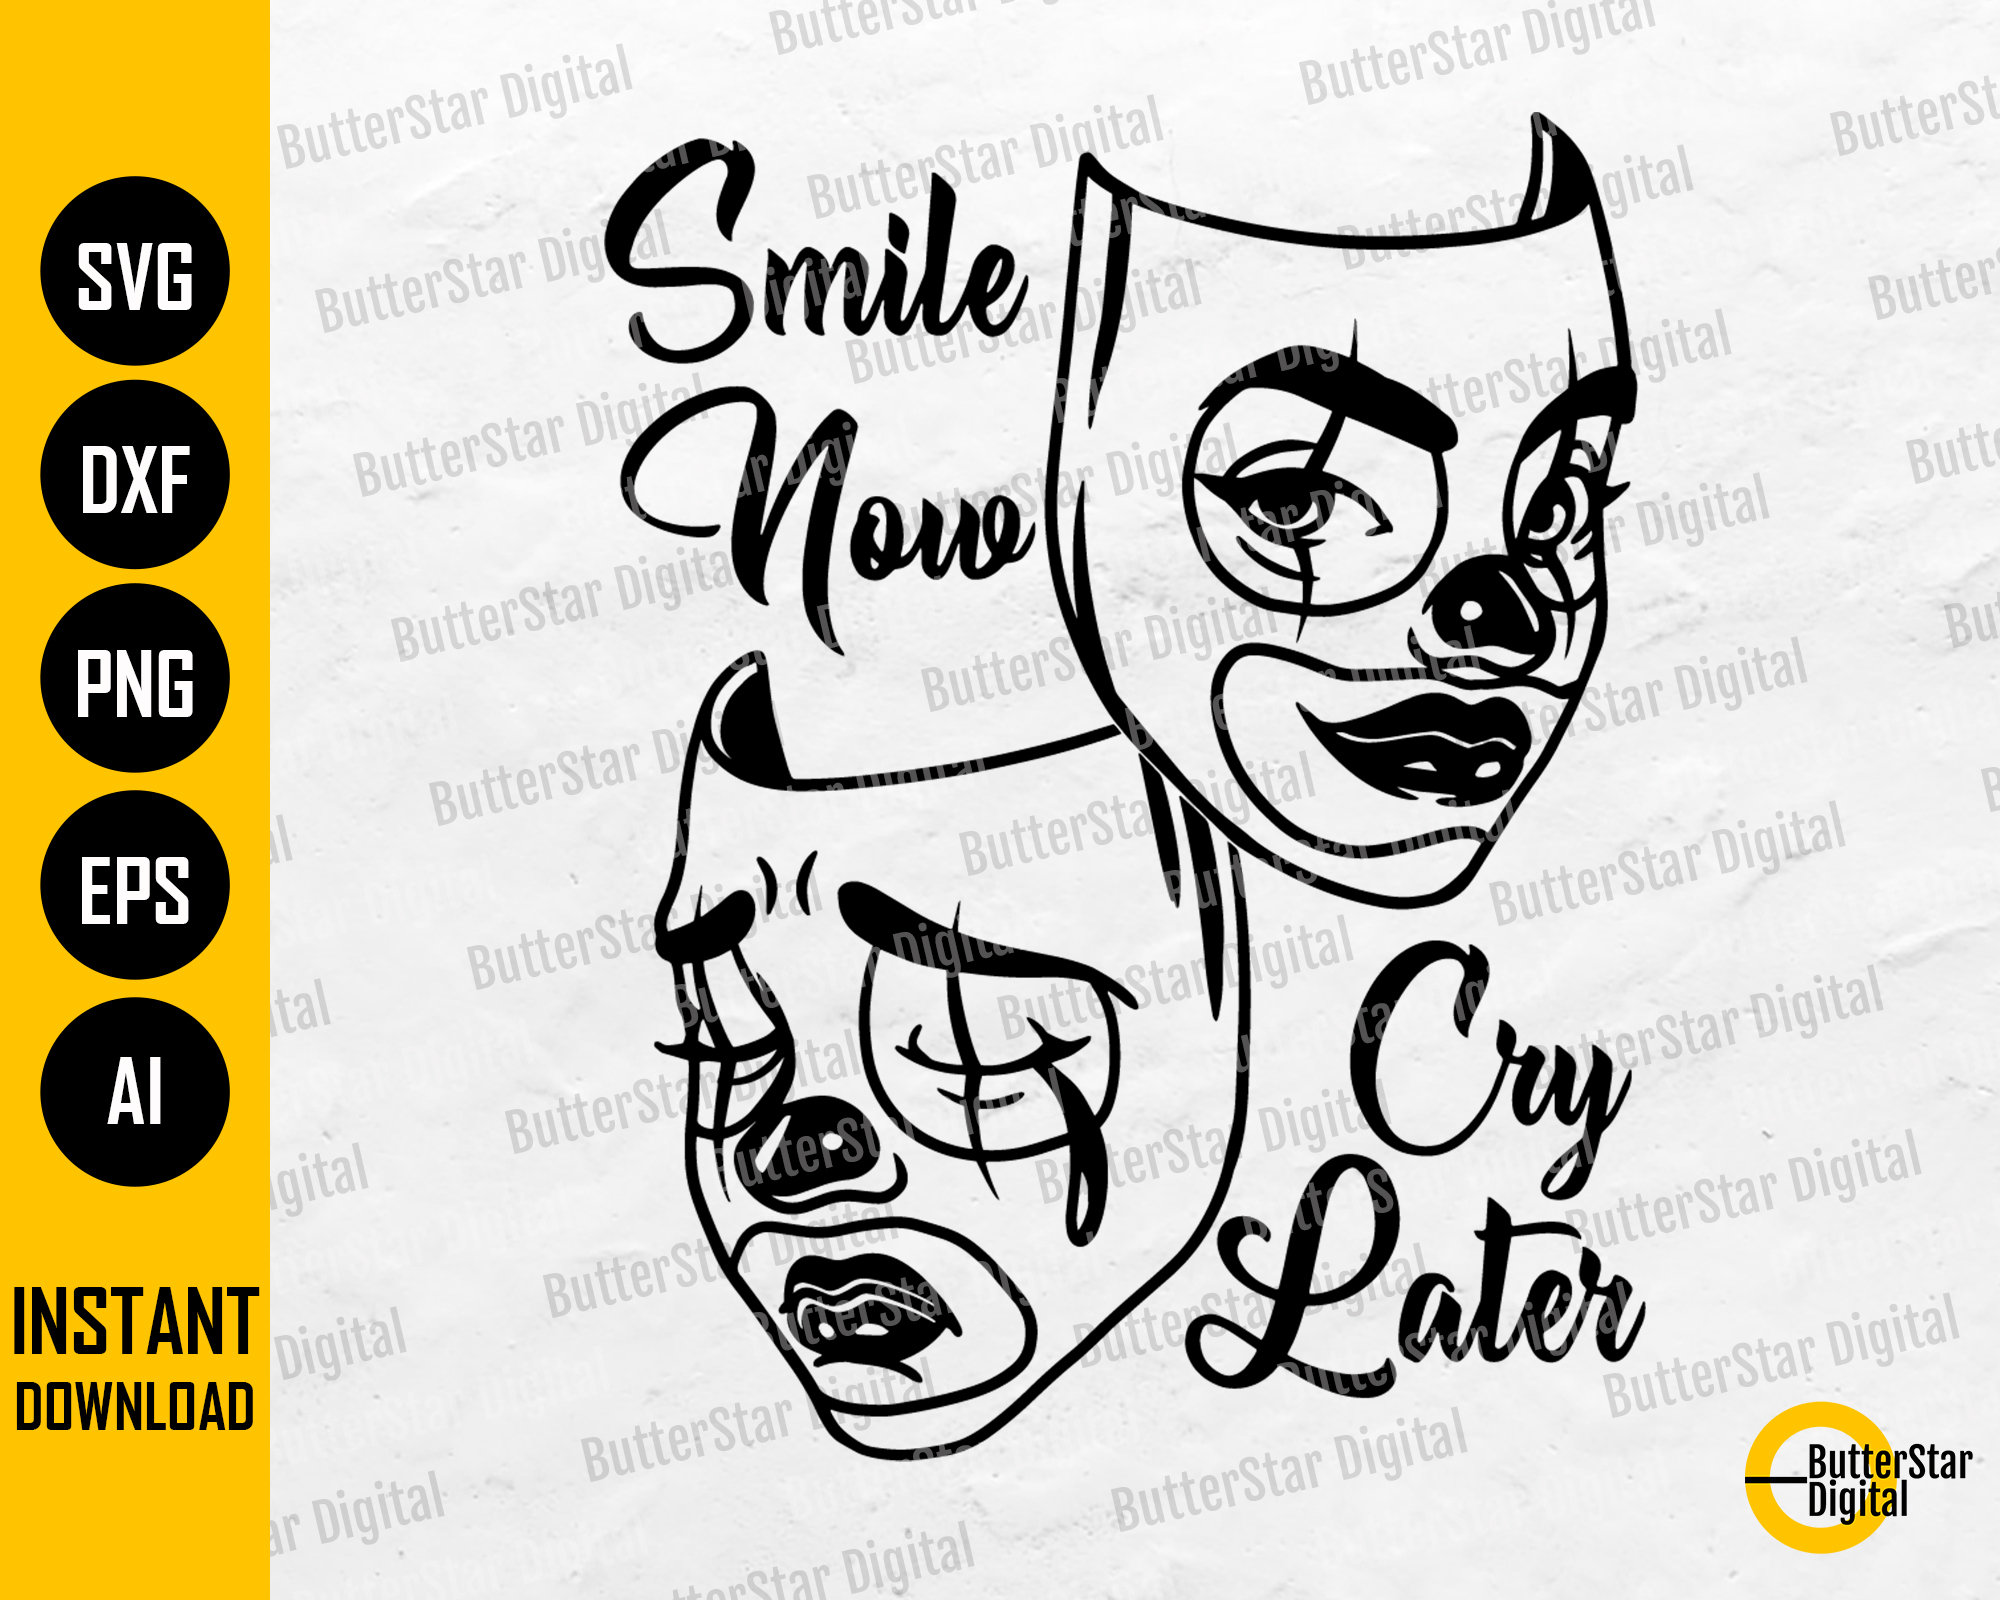 Laugh Now Cry Later, Play Now Pay Later, Clown tattoo Vector Stock Vector